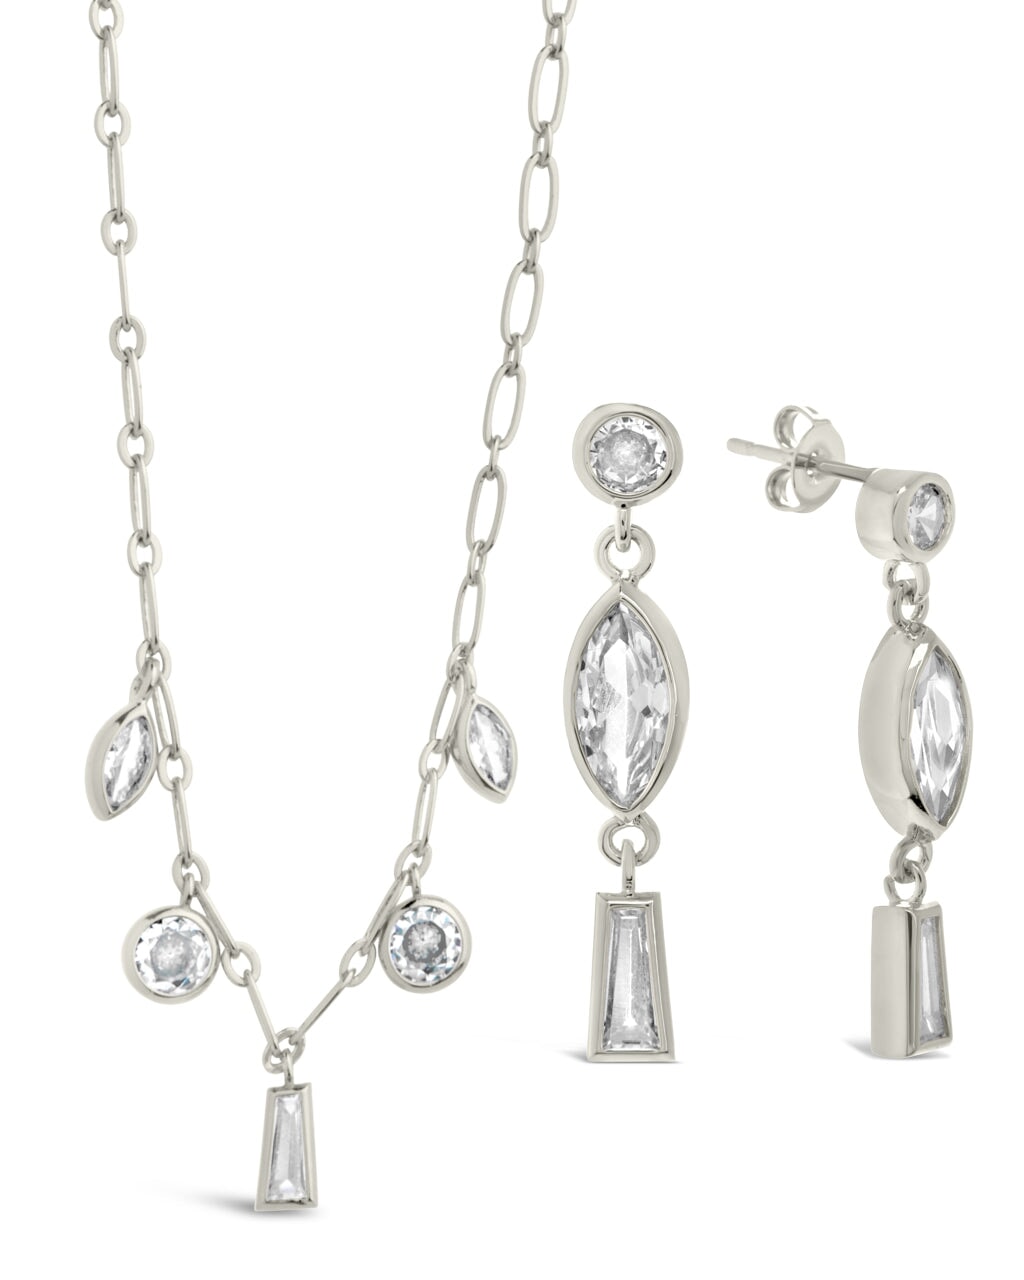 Suvi CZ Drop Earrings and Charm Necklace Set Bundles Sterling Forever Silver 